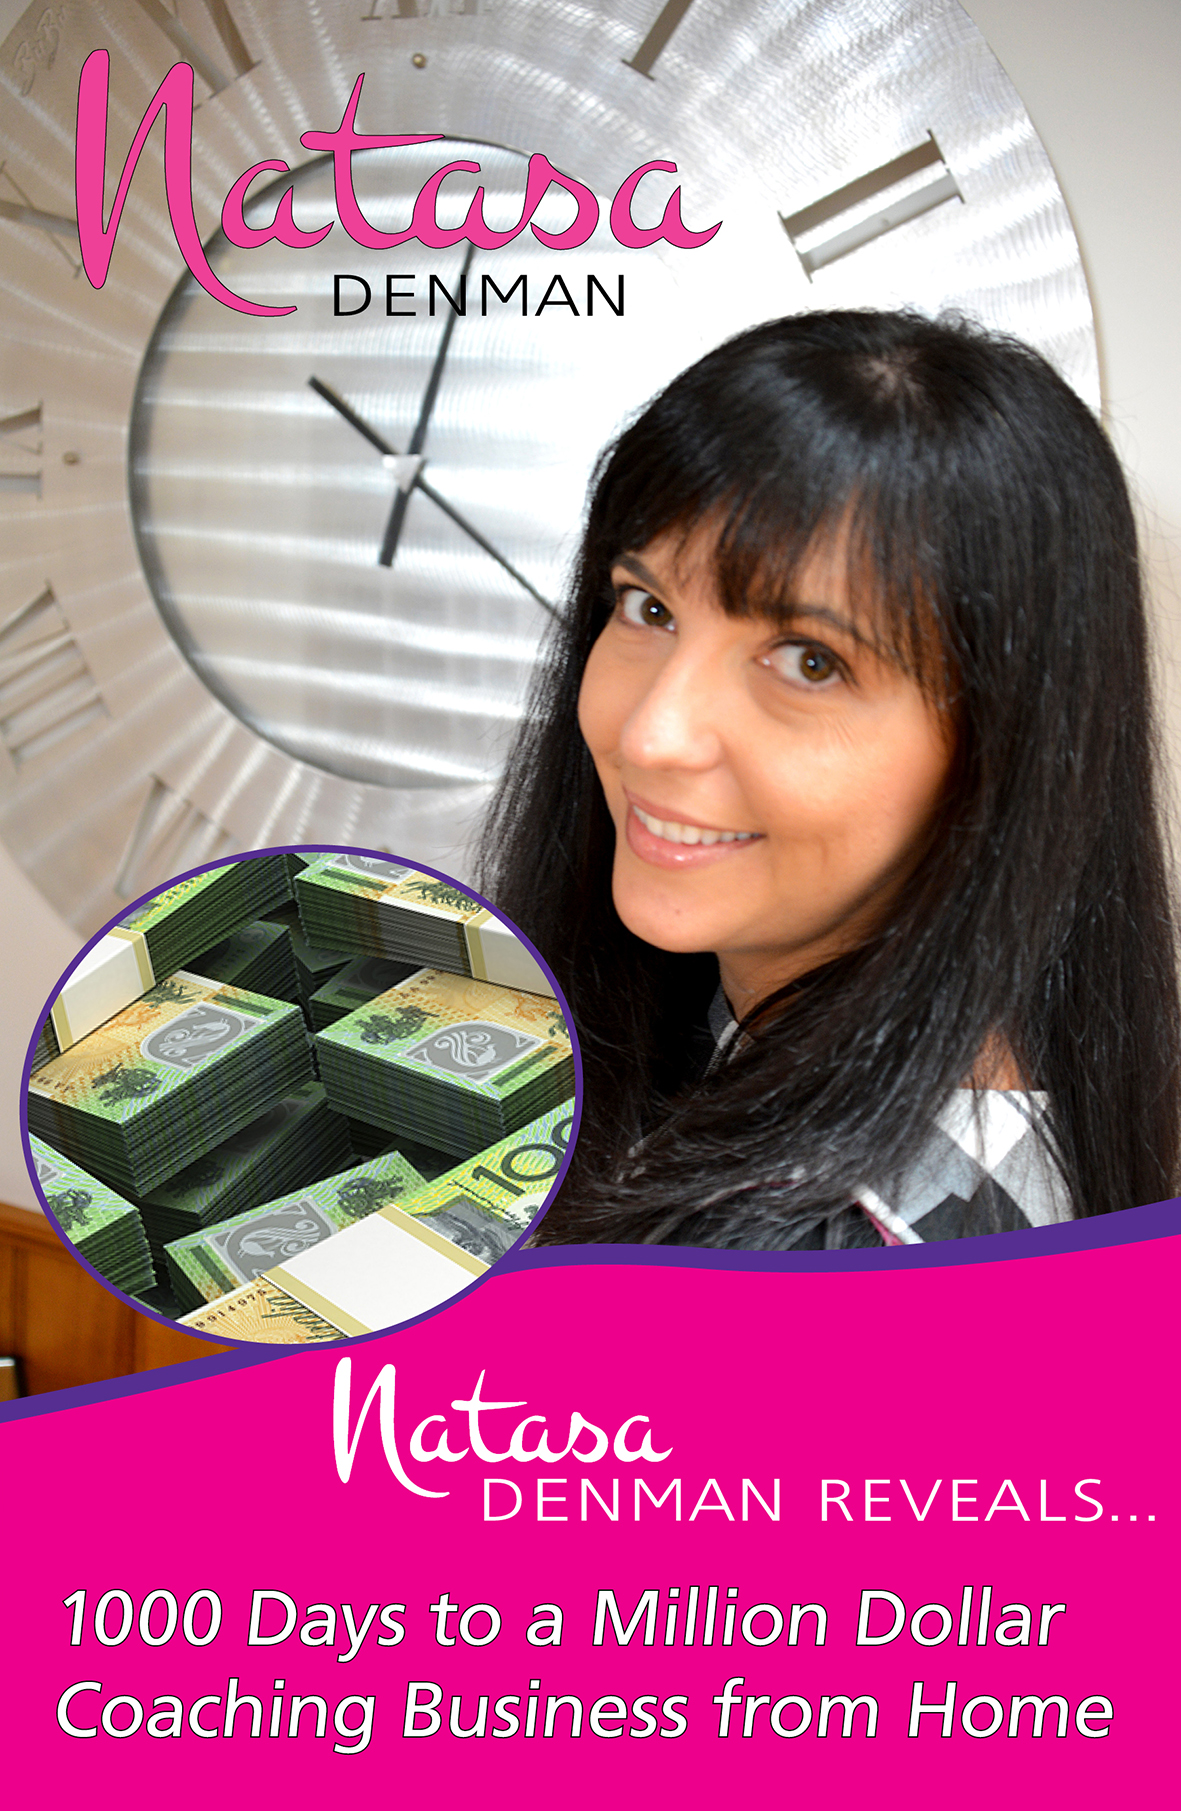 Natasa Denman Reveals … 1000 Days to a Million Dollar Coaching Business from Home